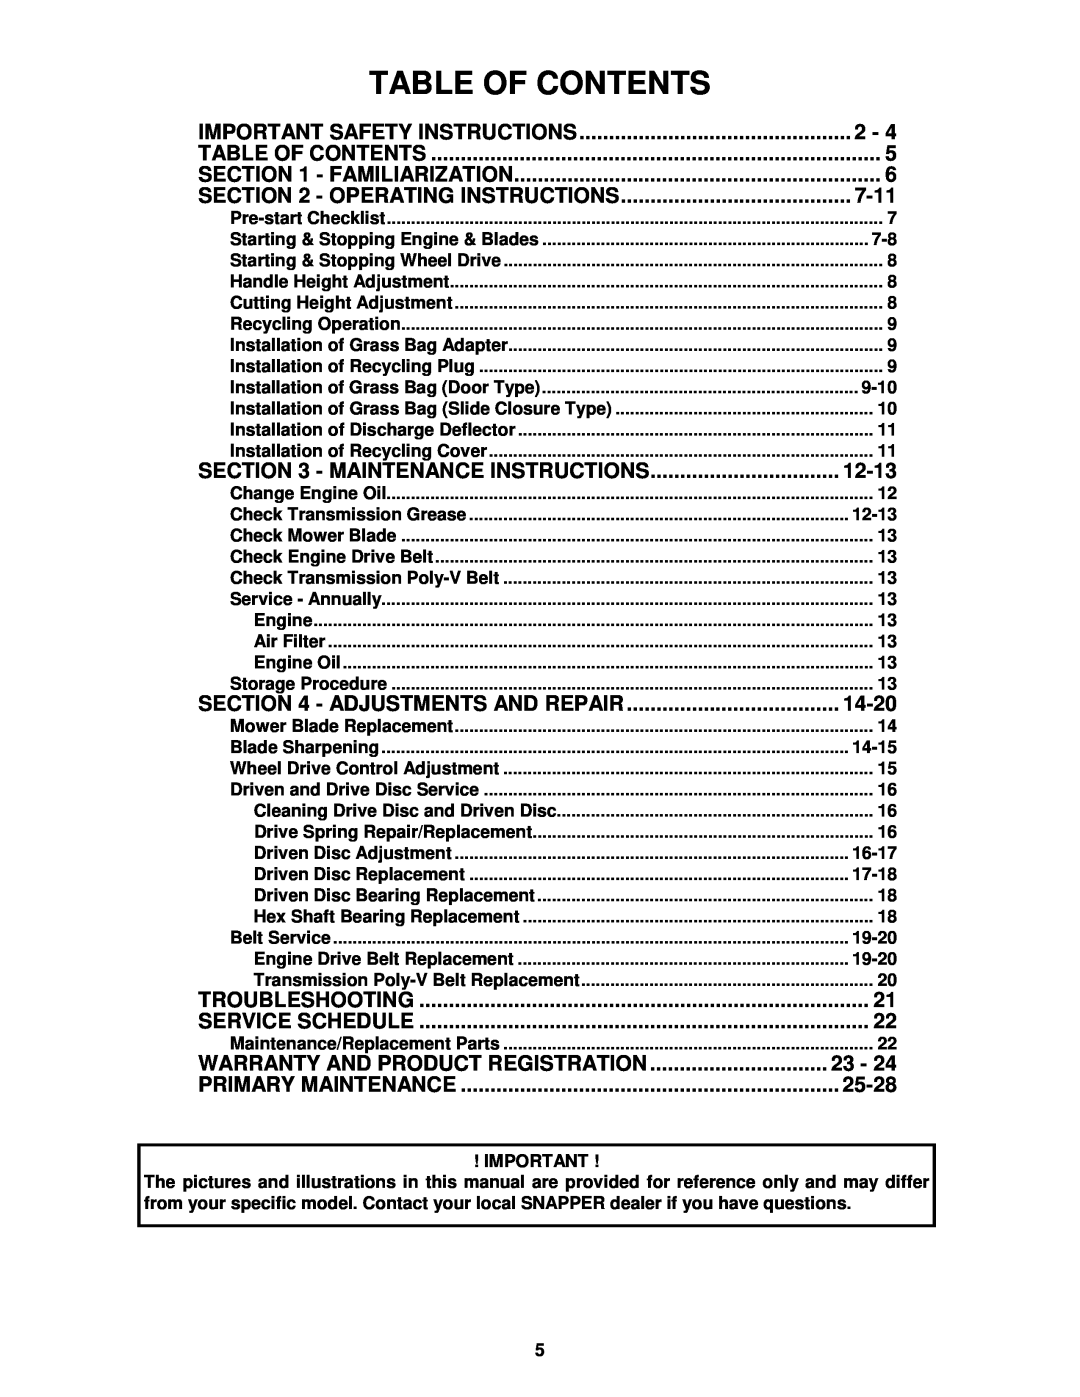 Snapper MR216017B important safety instructions Table Of Contents 